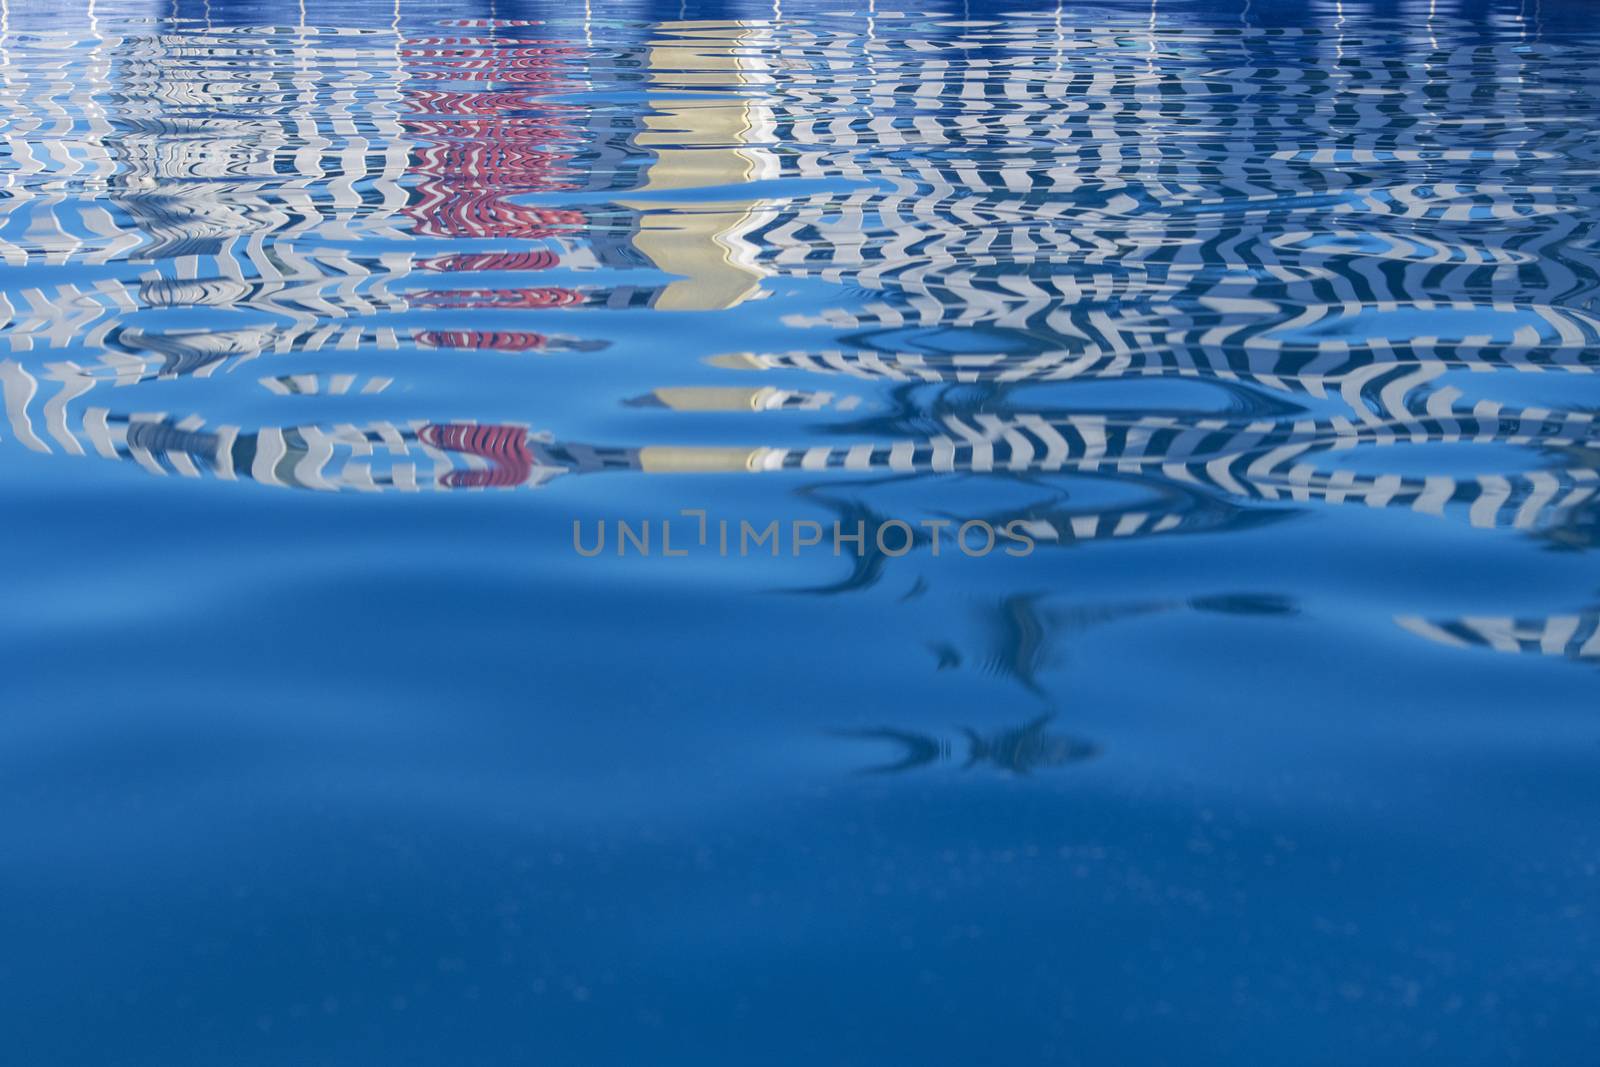 reflections at a pool by bernjuer